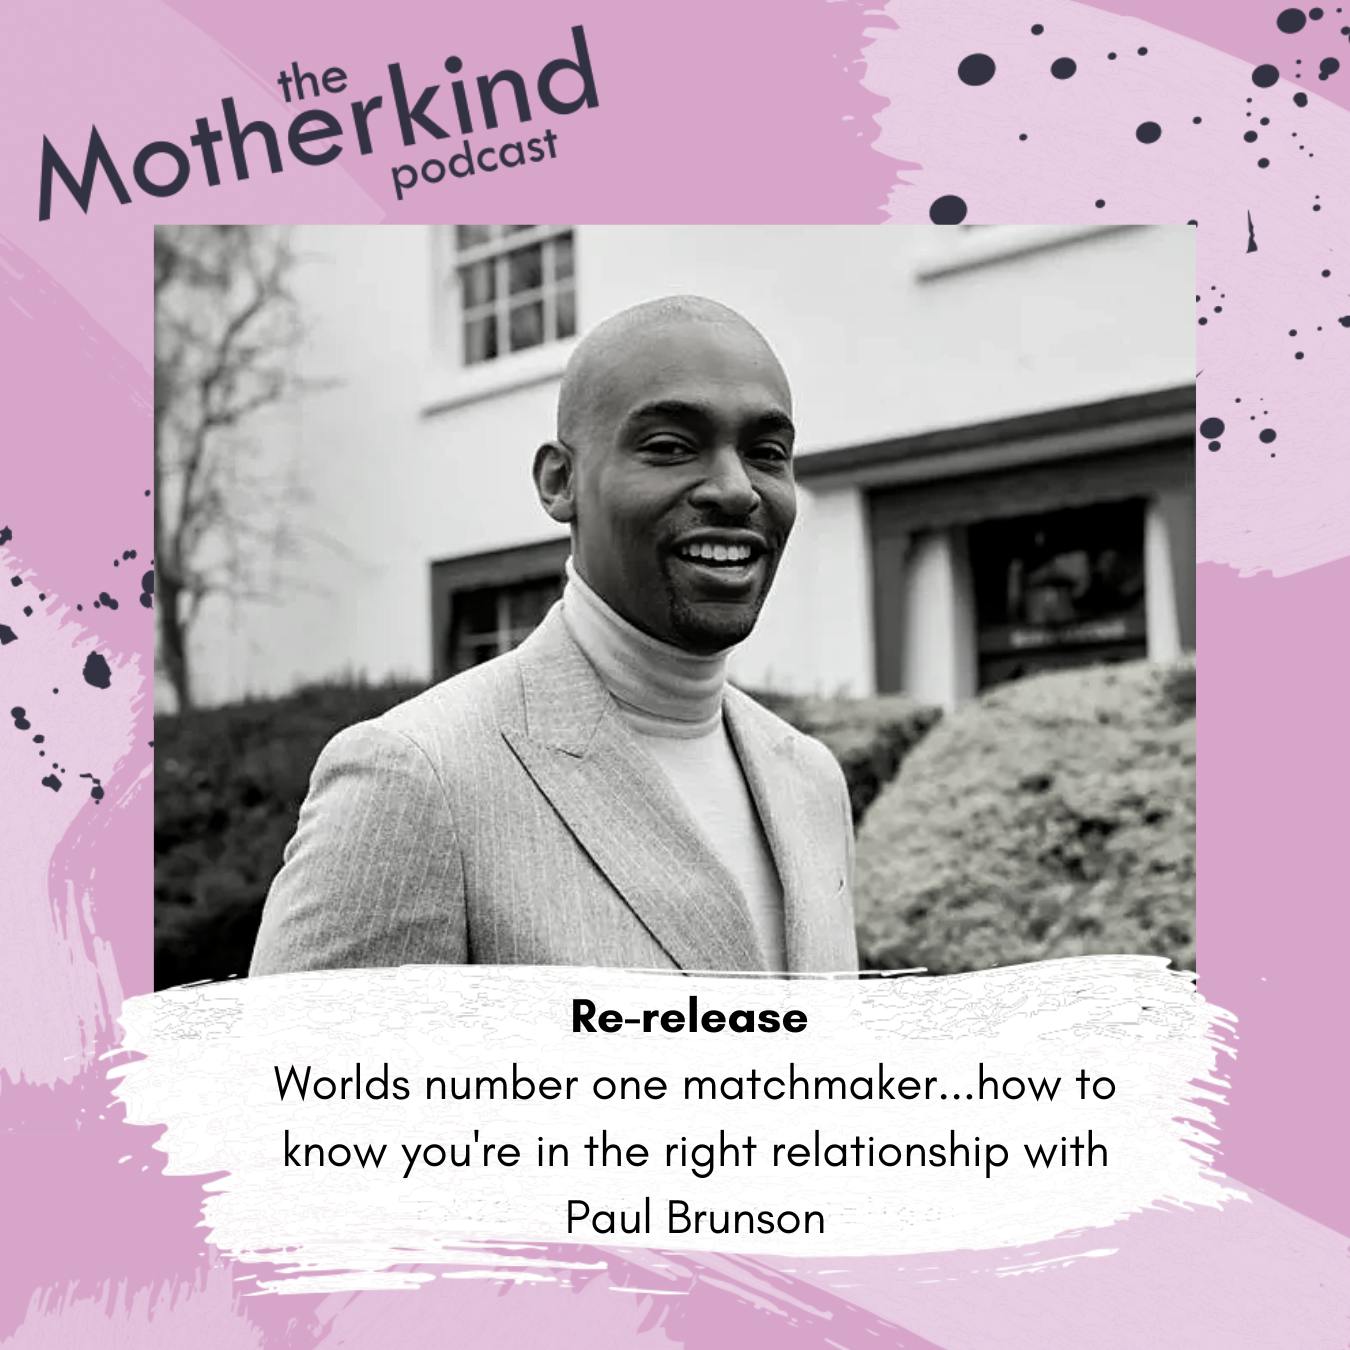 Re-release | Worlds number one matchmaker...how to know you're in the right relationship with Paul Brunson